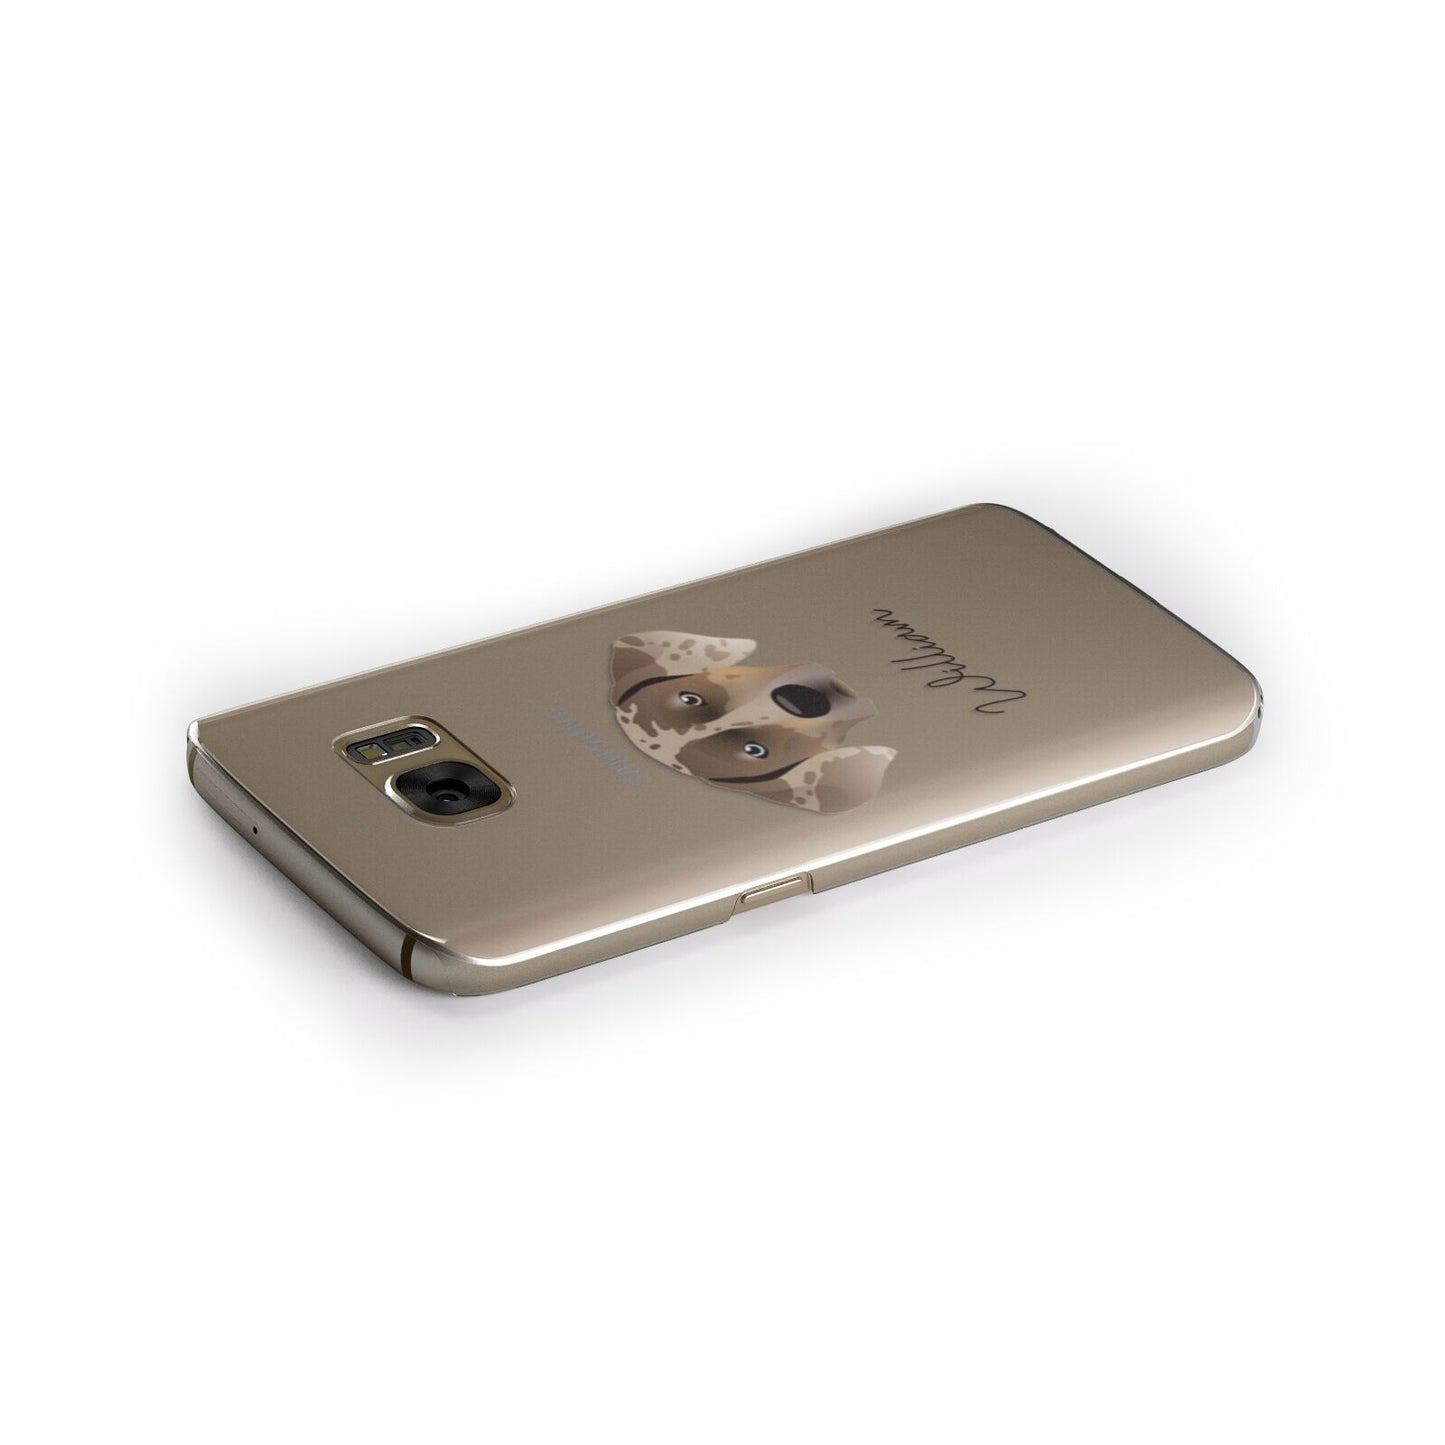 Catahoula Leopard Dog Personalised Samsung Galaxy Case Side Close Up